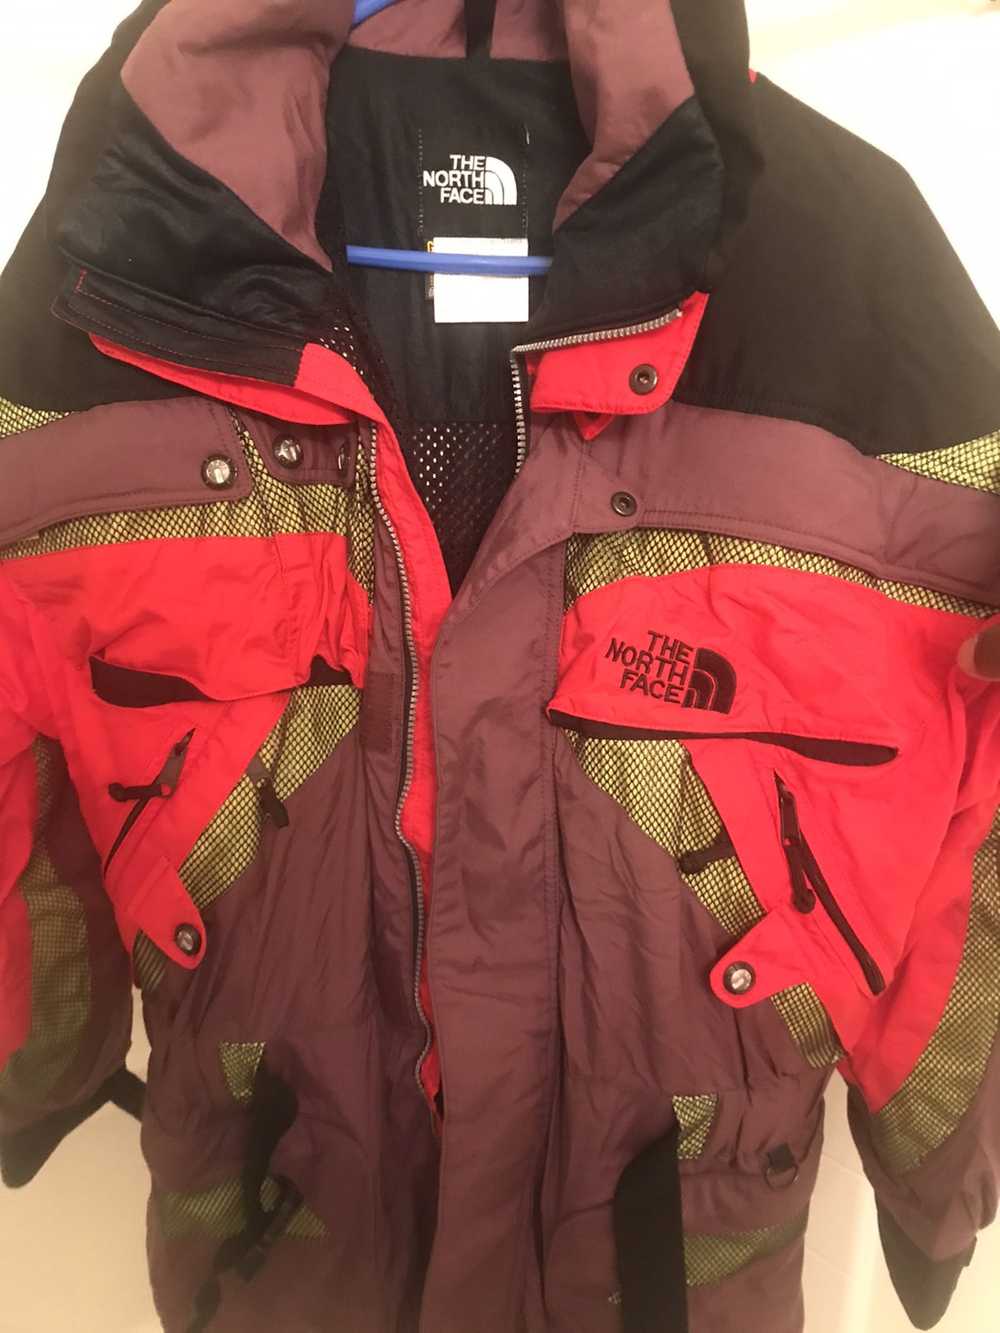 The North Face TNF Gore-Tex Jacket - image 4